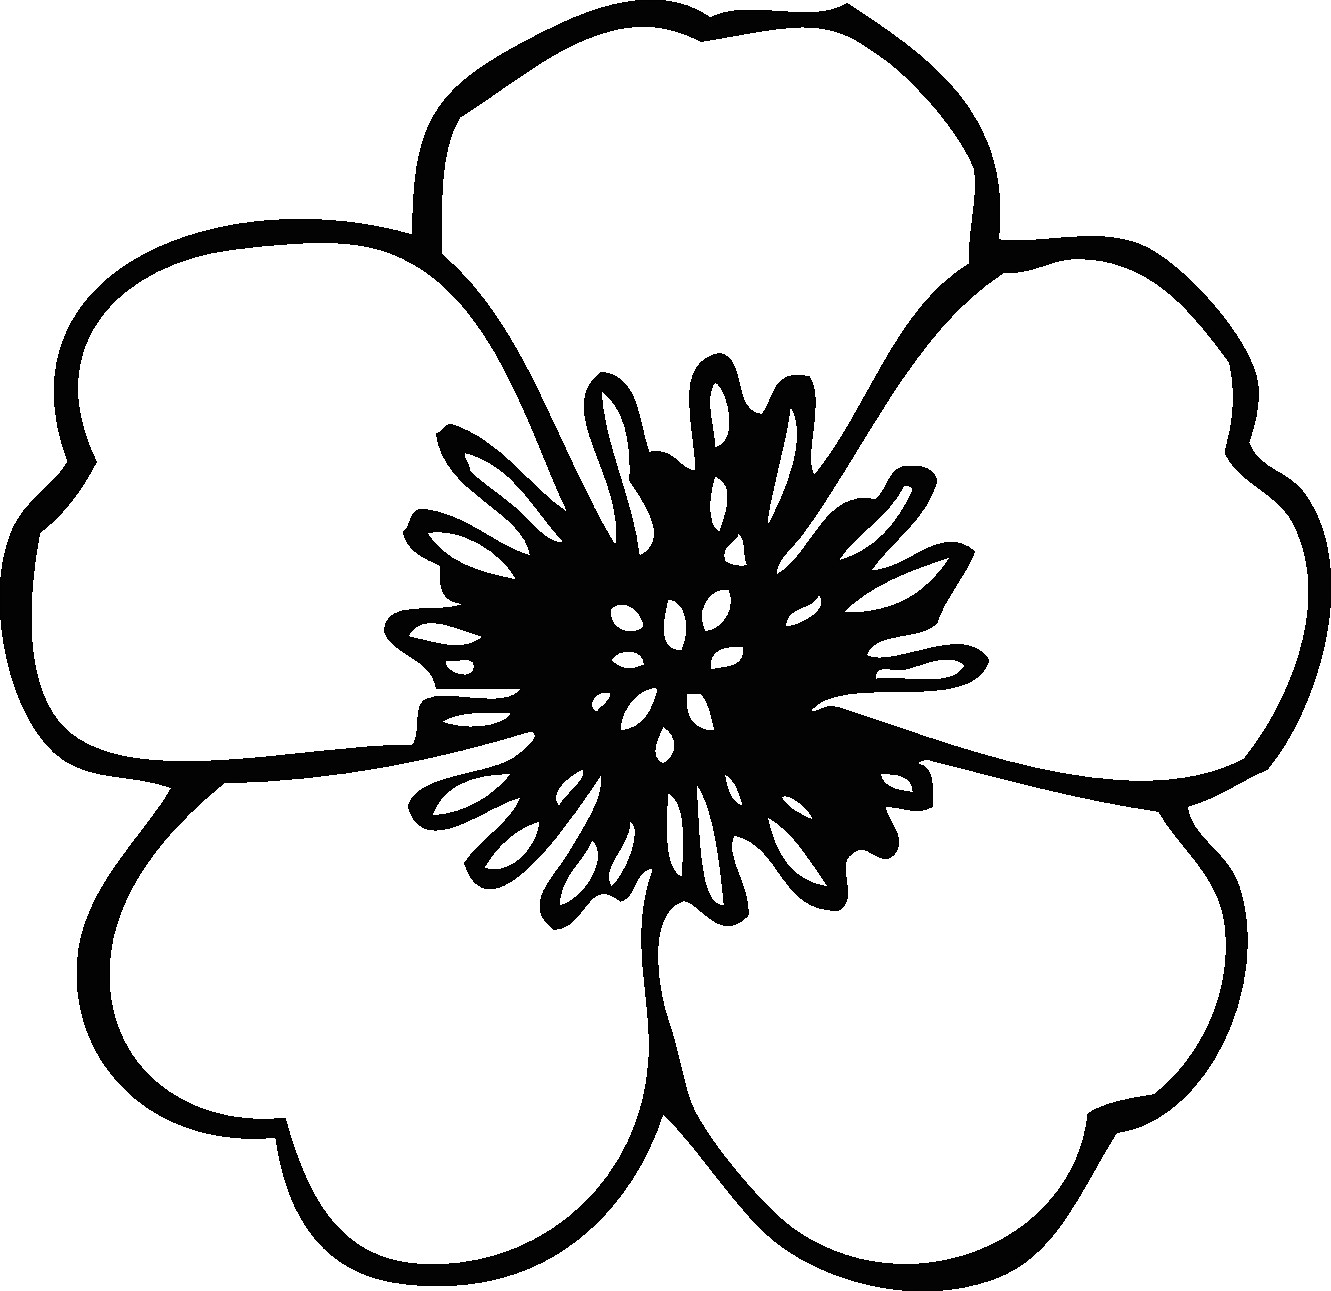 Template for Drawing A Rose Flower Black White Line Clipart Panda Free Clipart Images